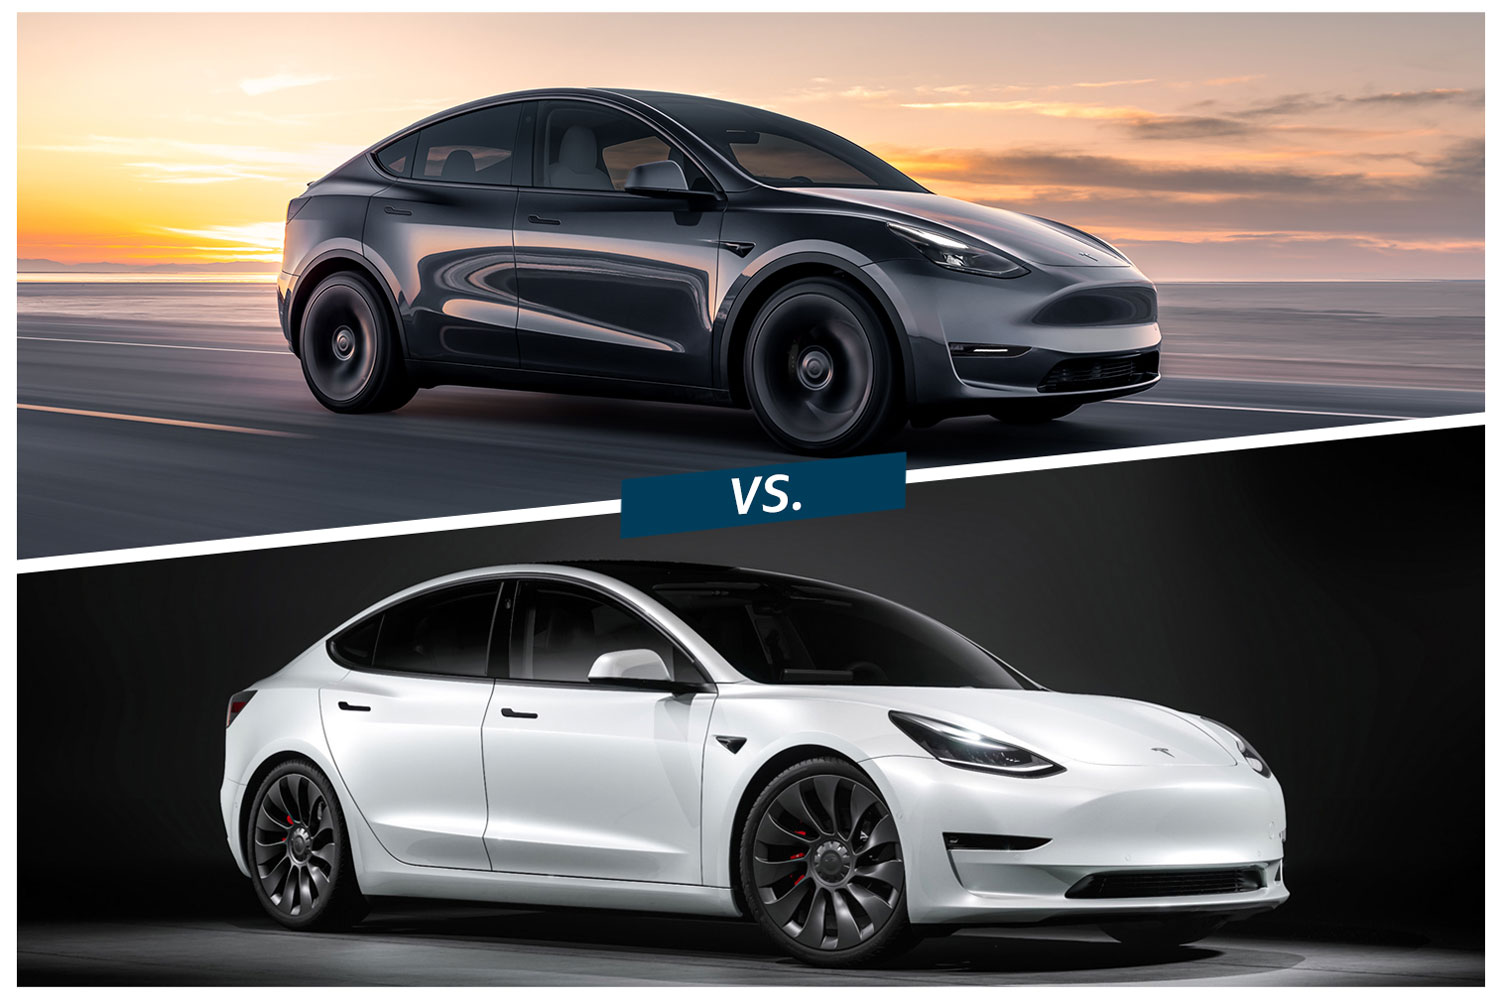 The Tesla Model Y is ready to change: This is what it will look like